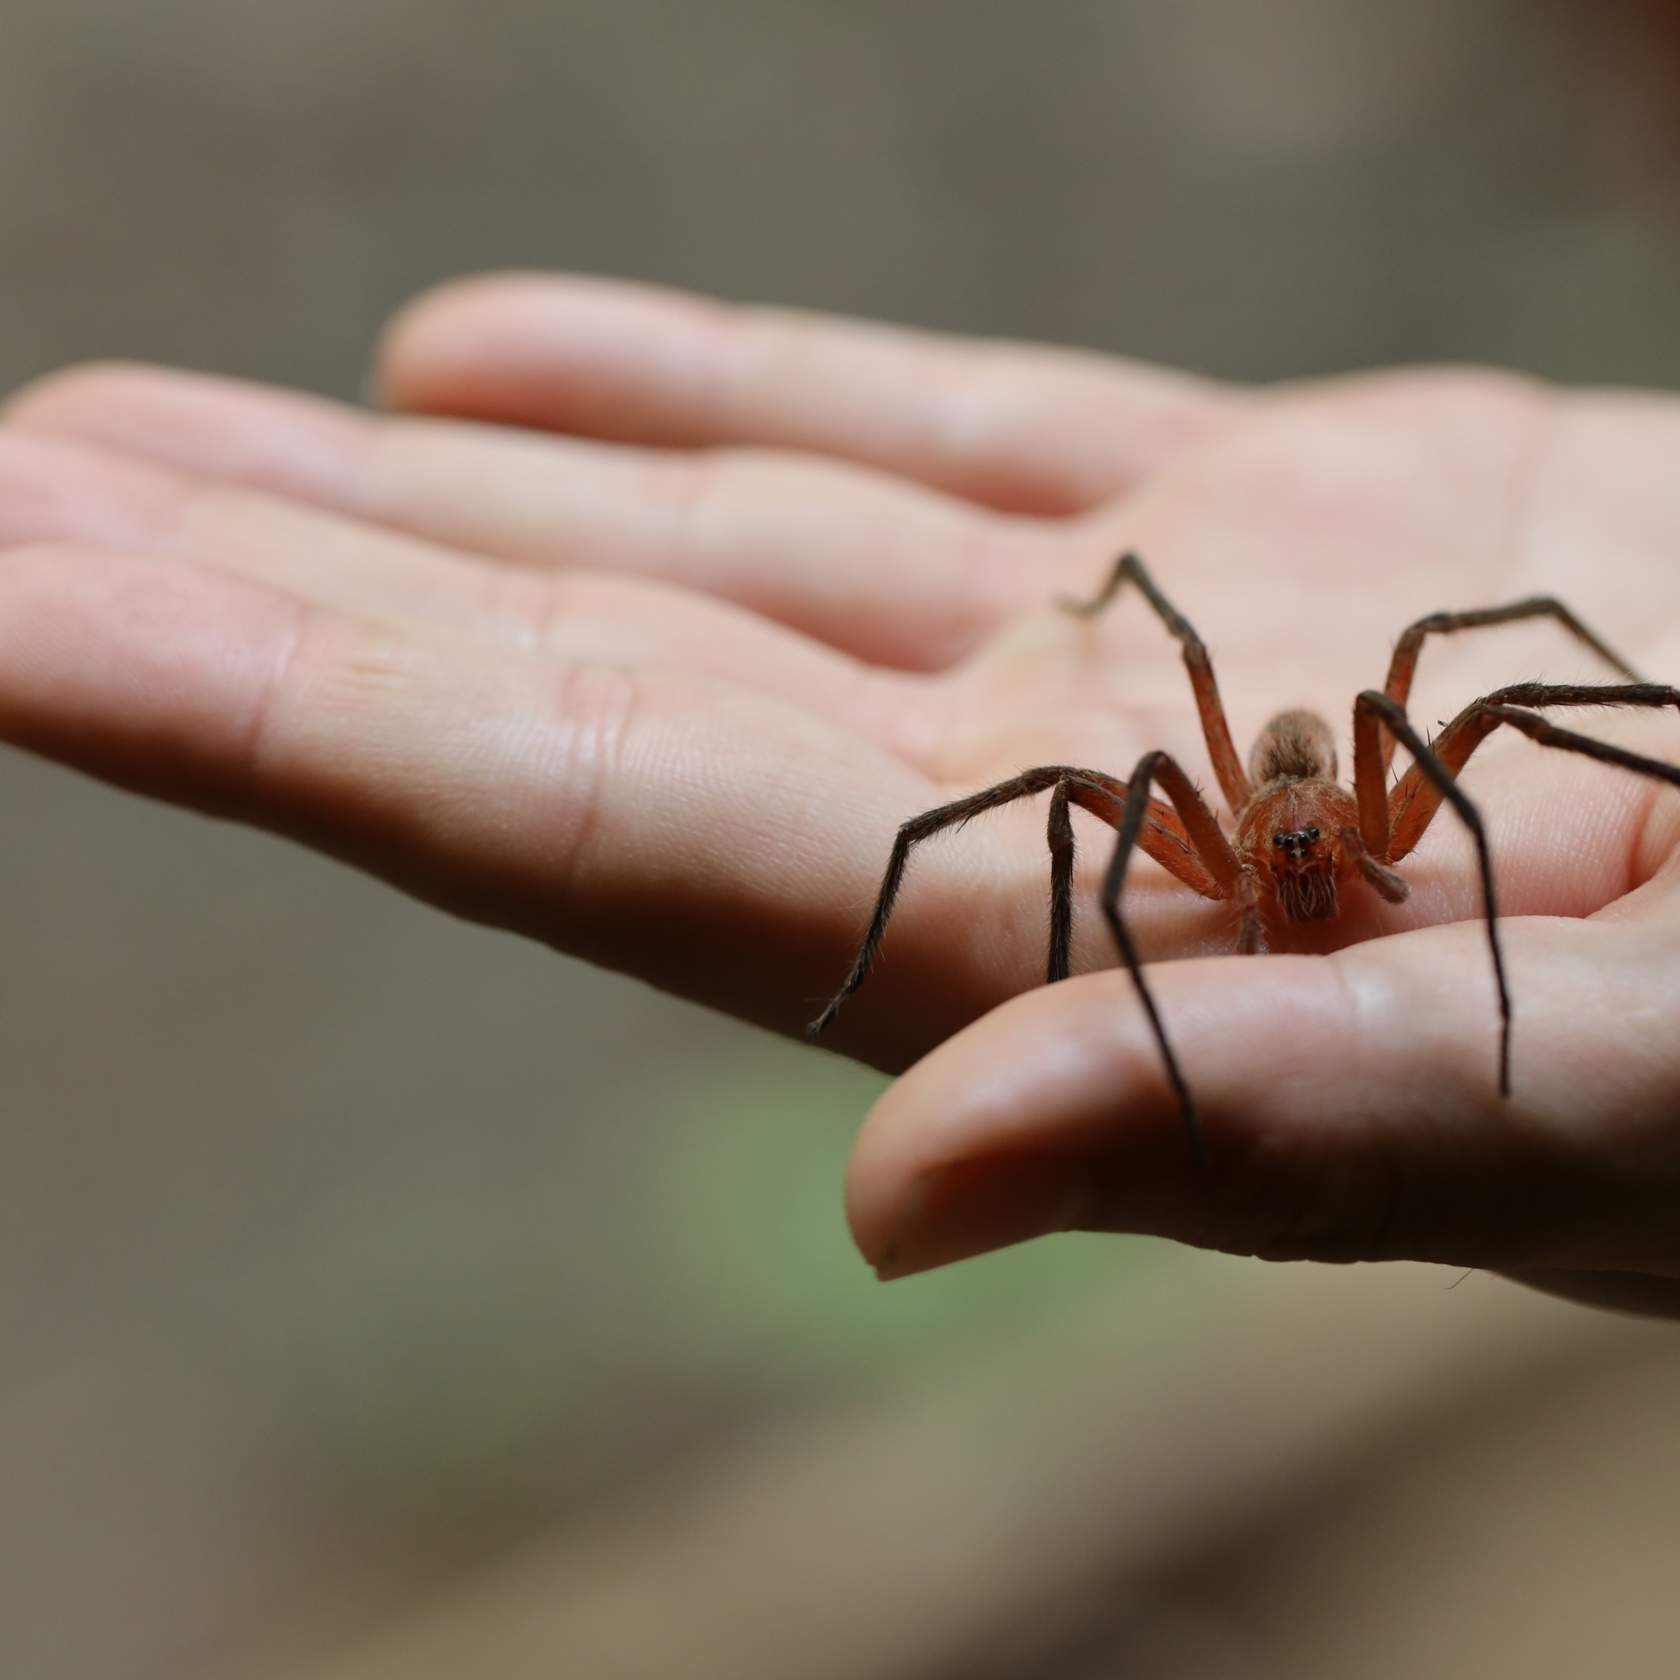 A large spider rests on a person's open palm